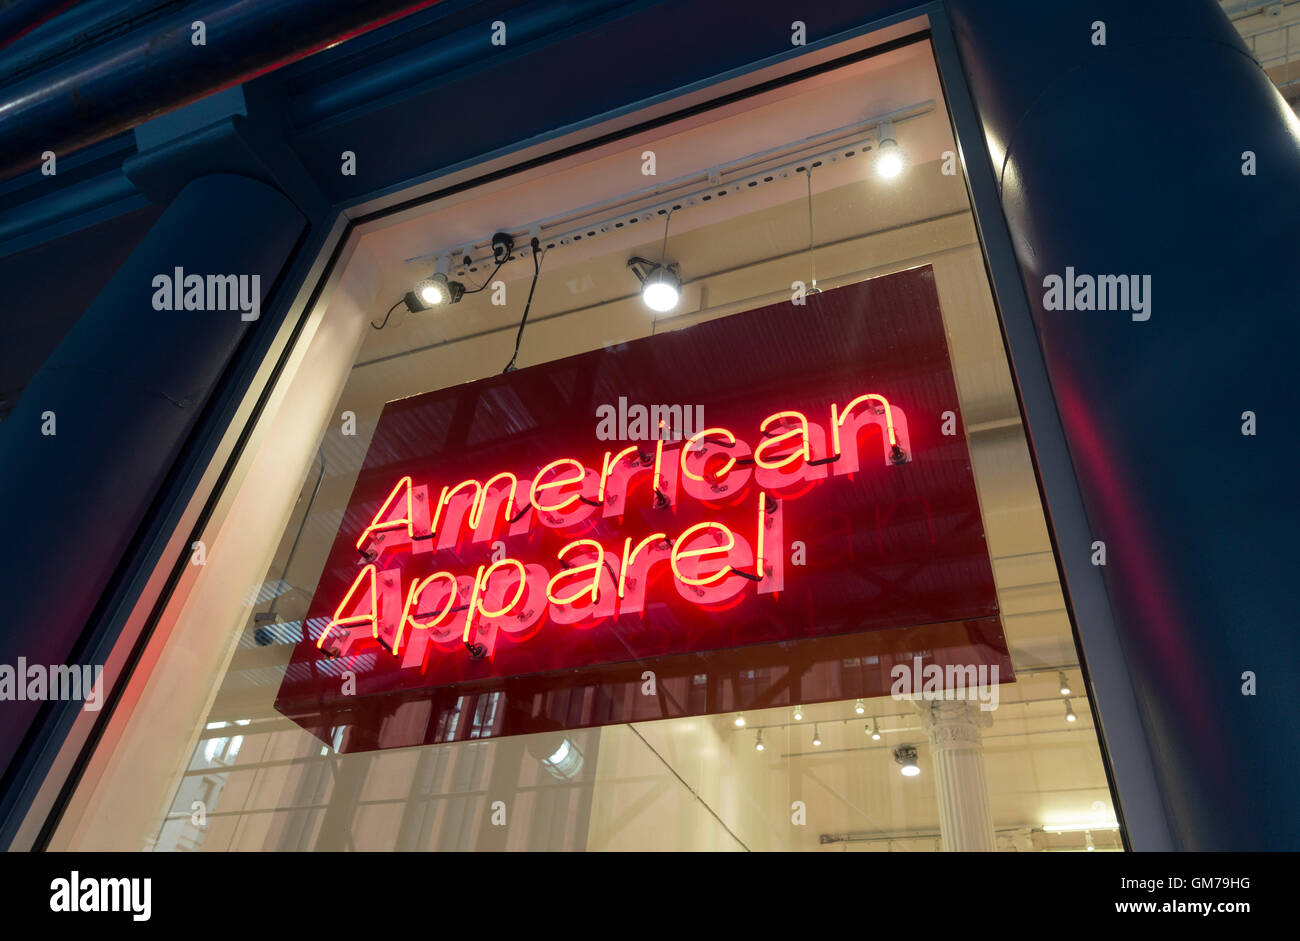 A neon sign in a shop window says American Apparel, which is both a brand name and a category of clothing Stock Photo